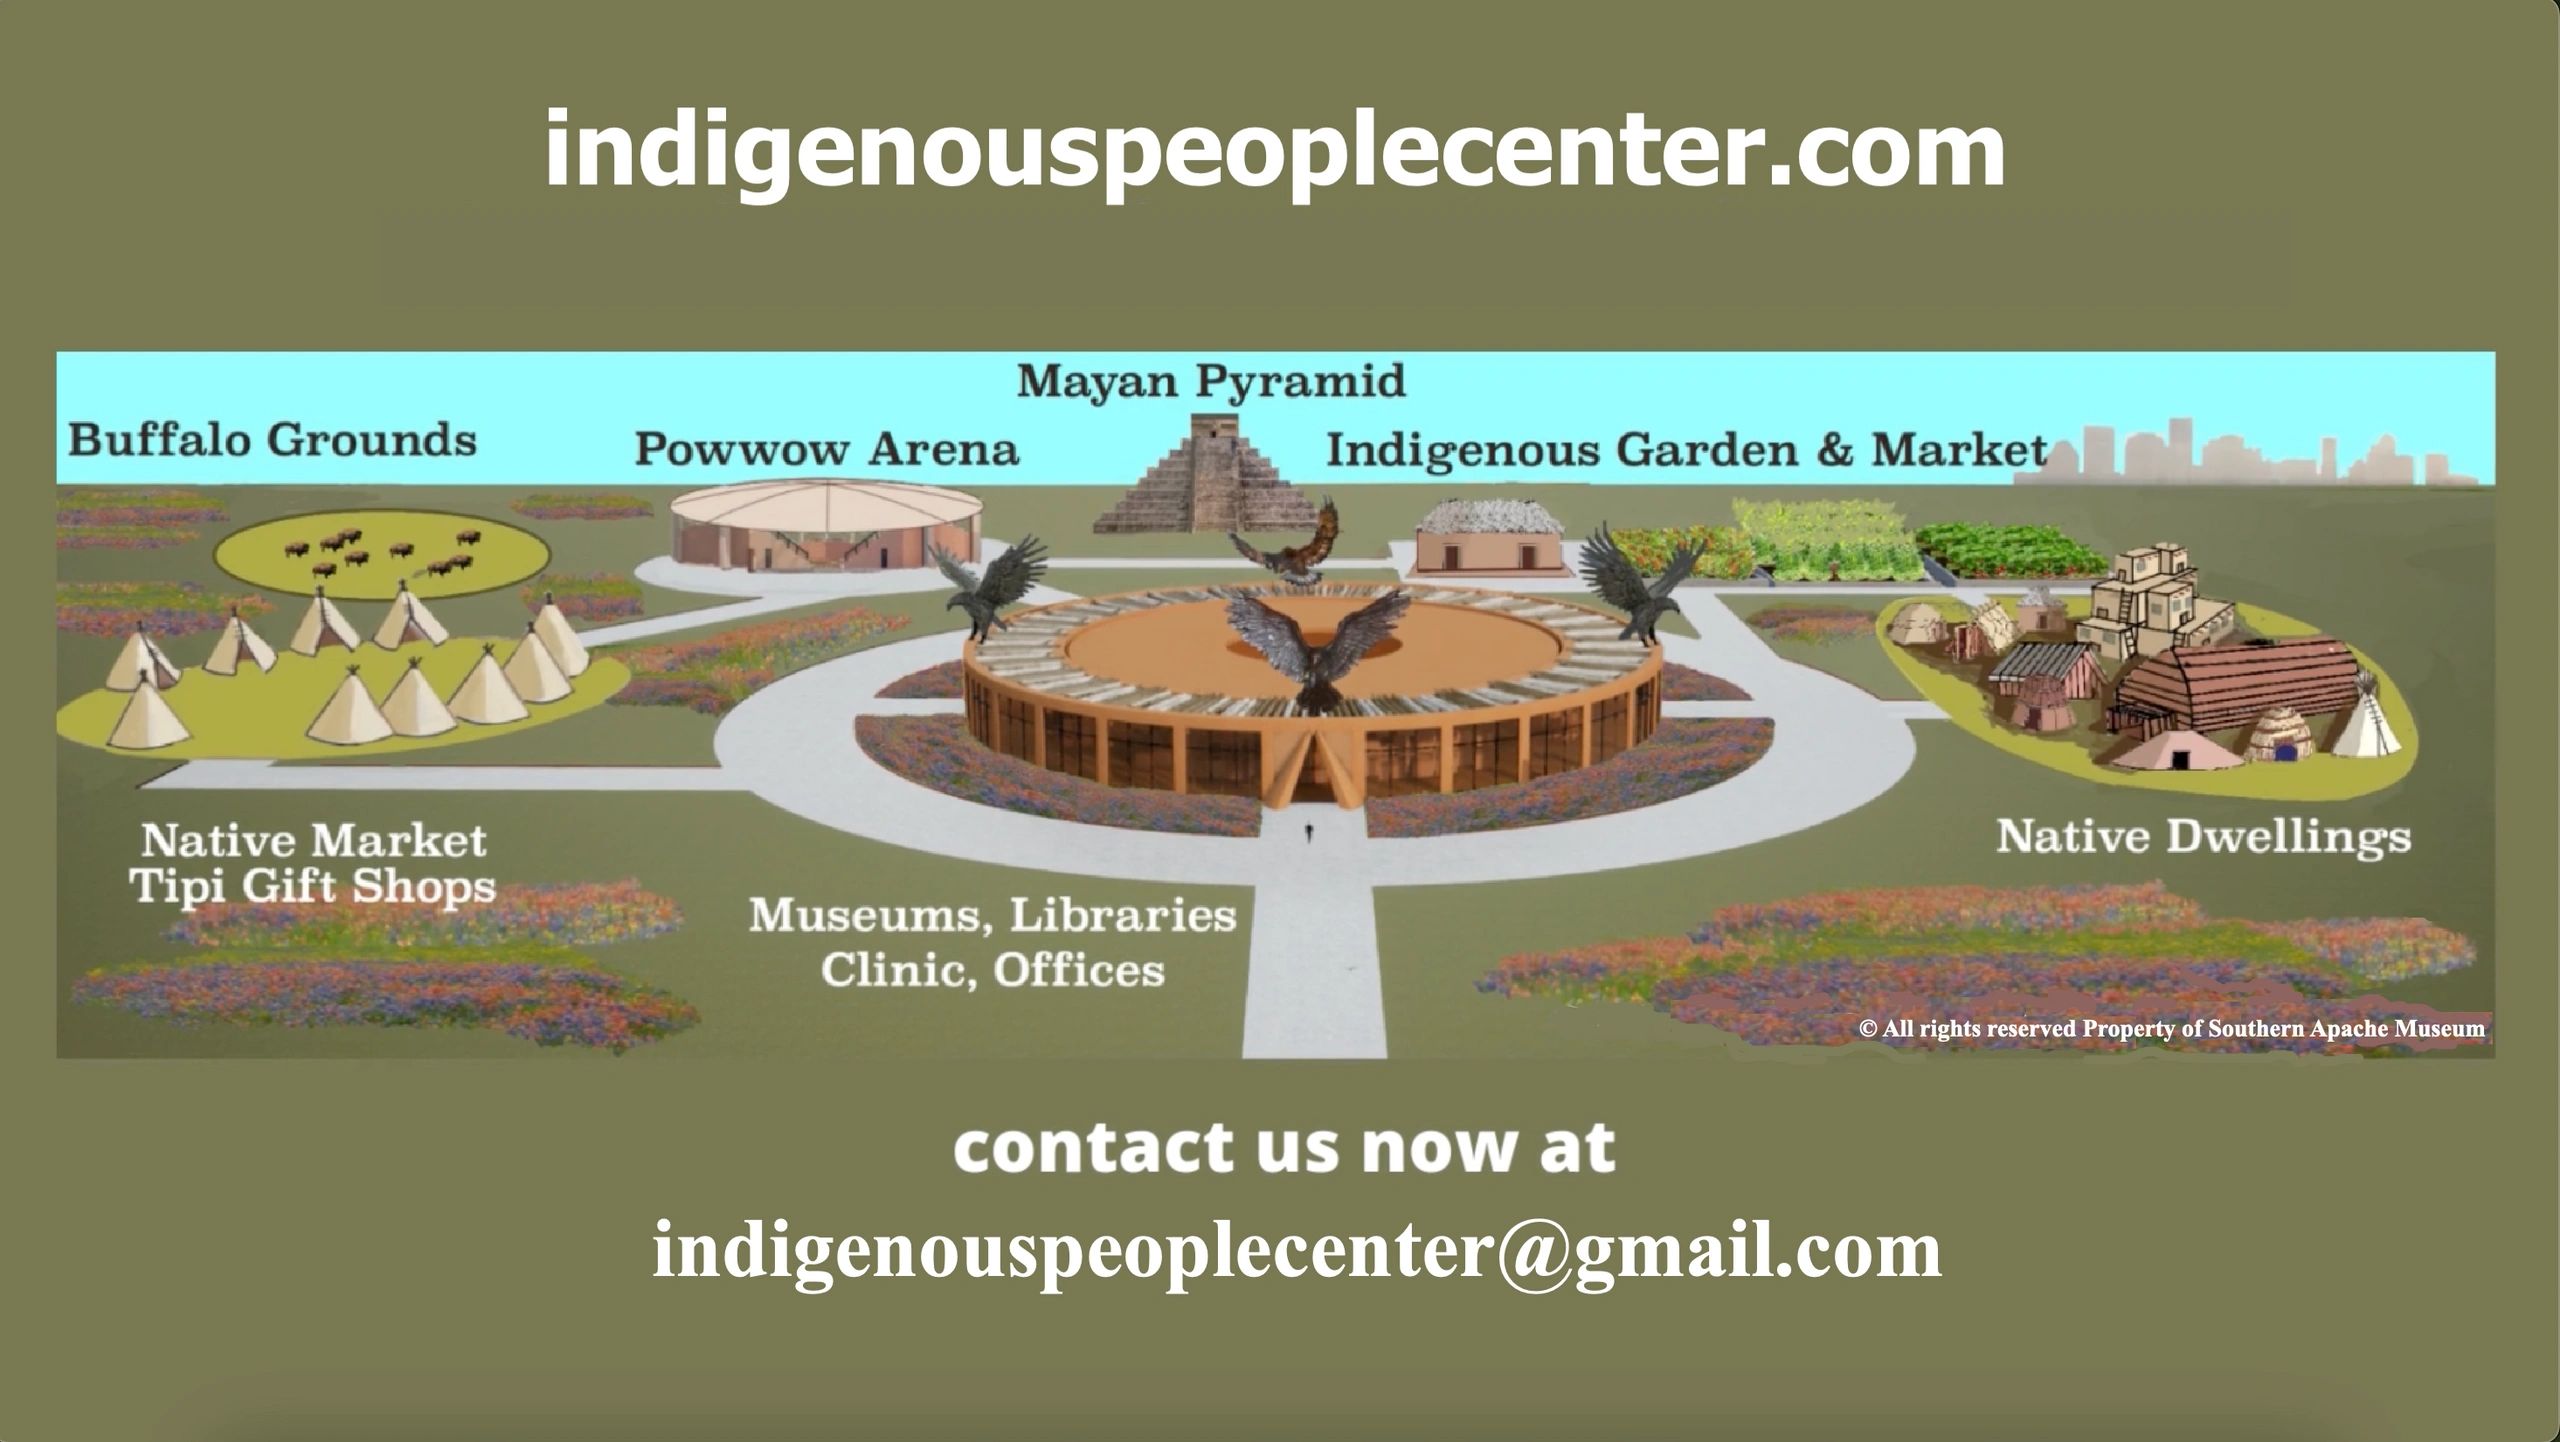 THE FUTURE FOR OUR INDIGENOUS PEOPLE IN HOUSTON